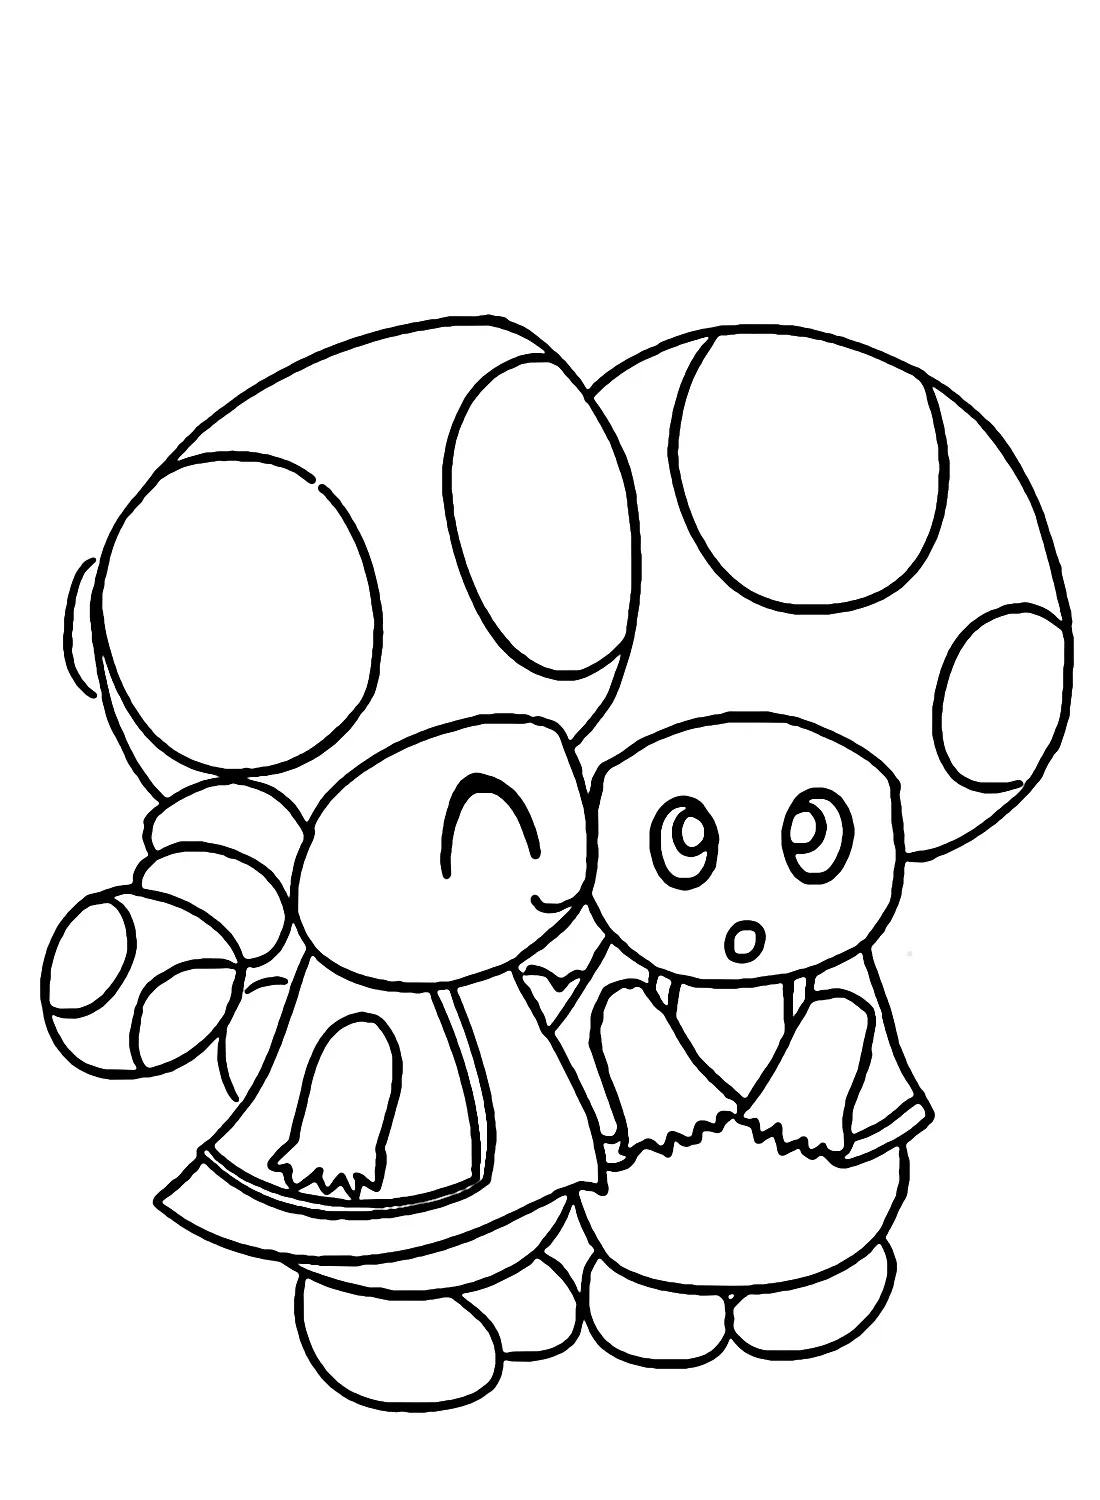 Toadette Coloring Pages